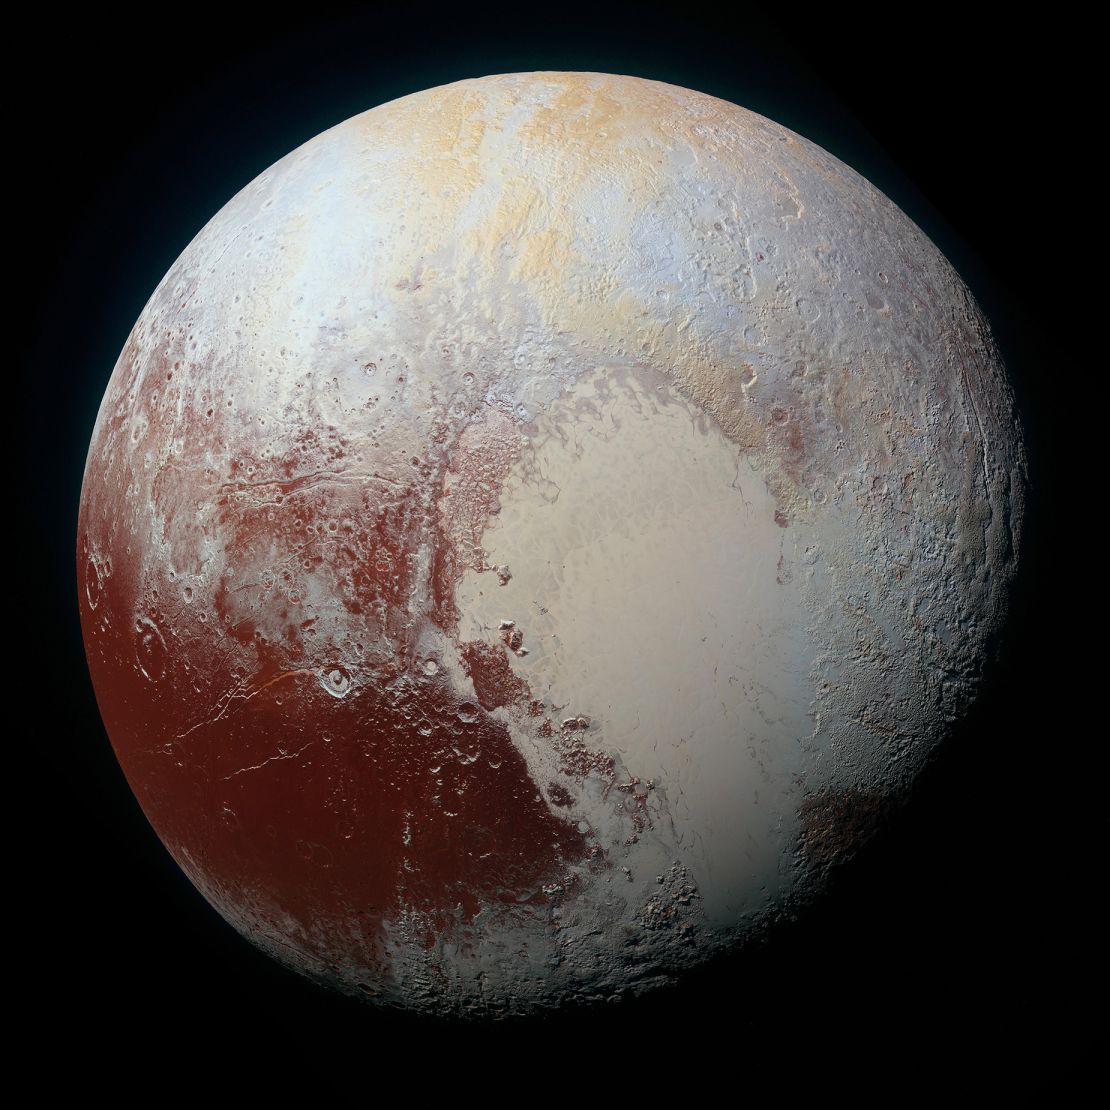 The New Horizons spacecraft took an image of Pluto's heart on July 14, 2015.